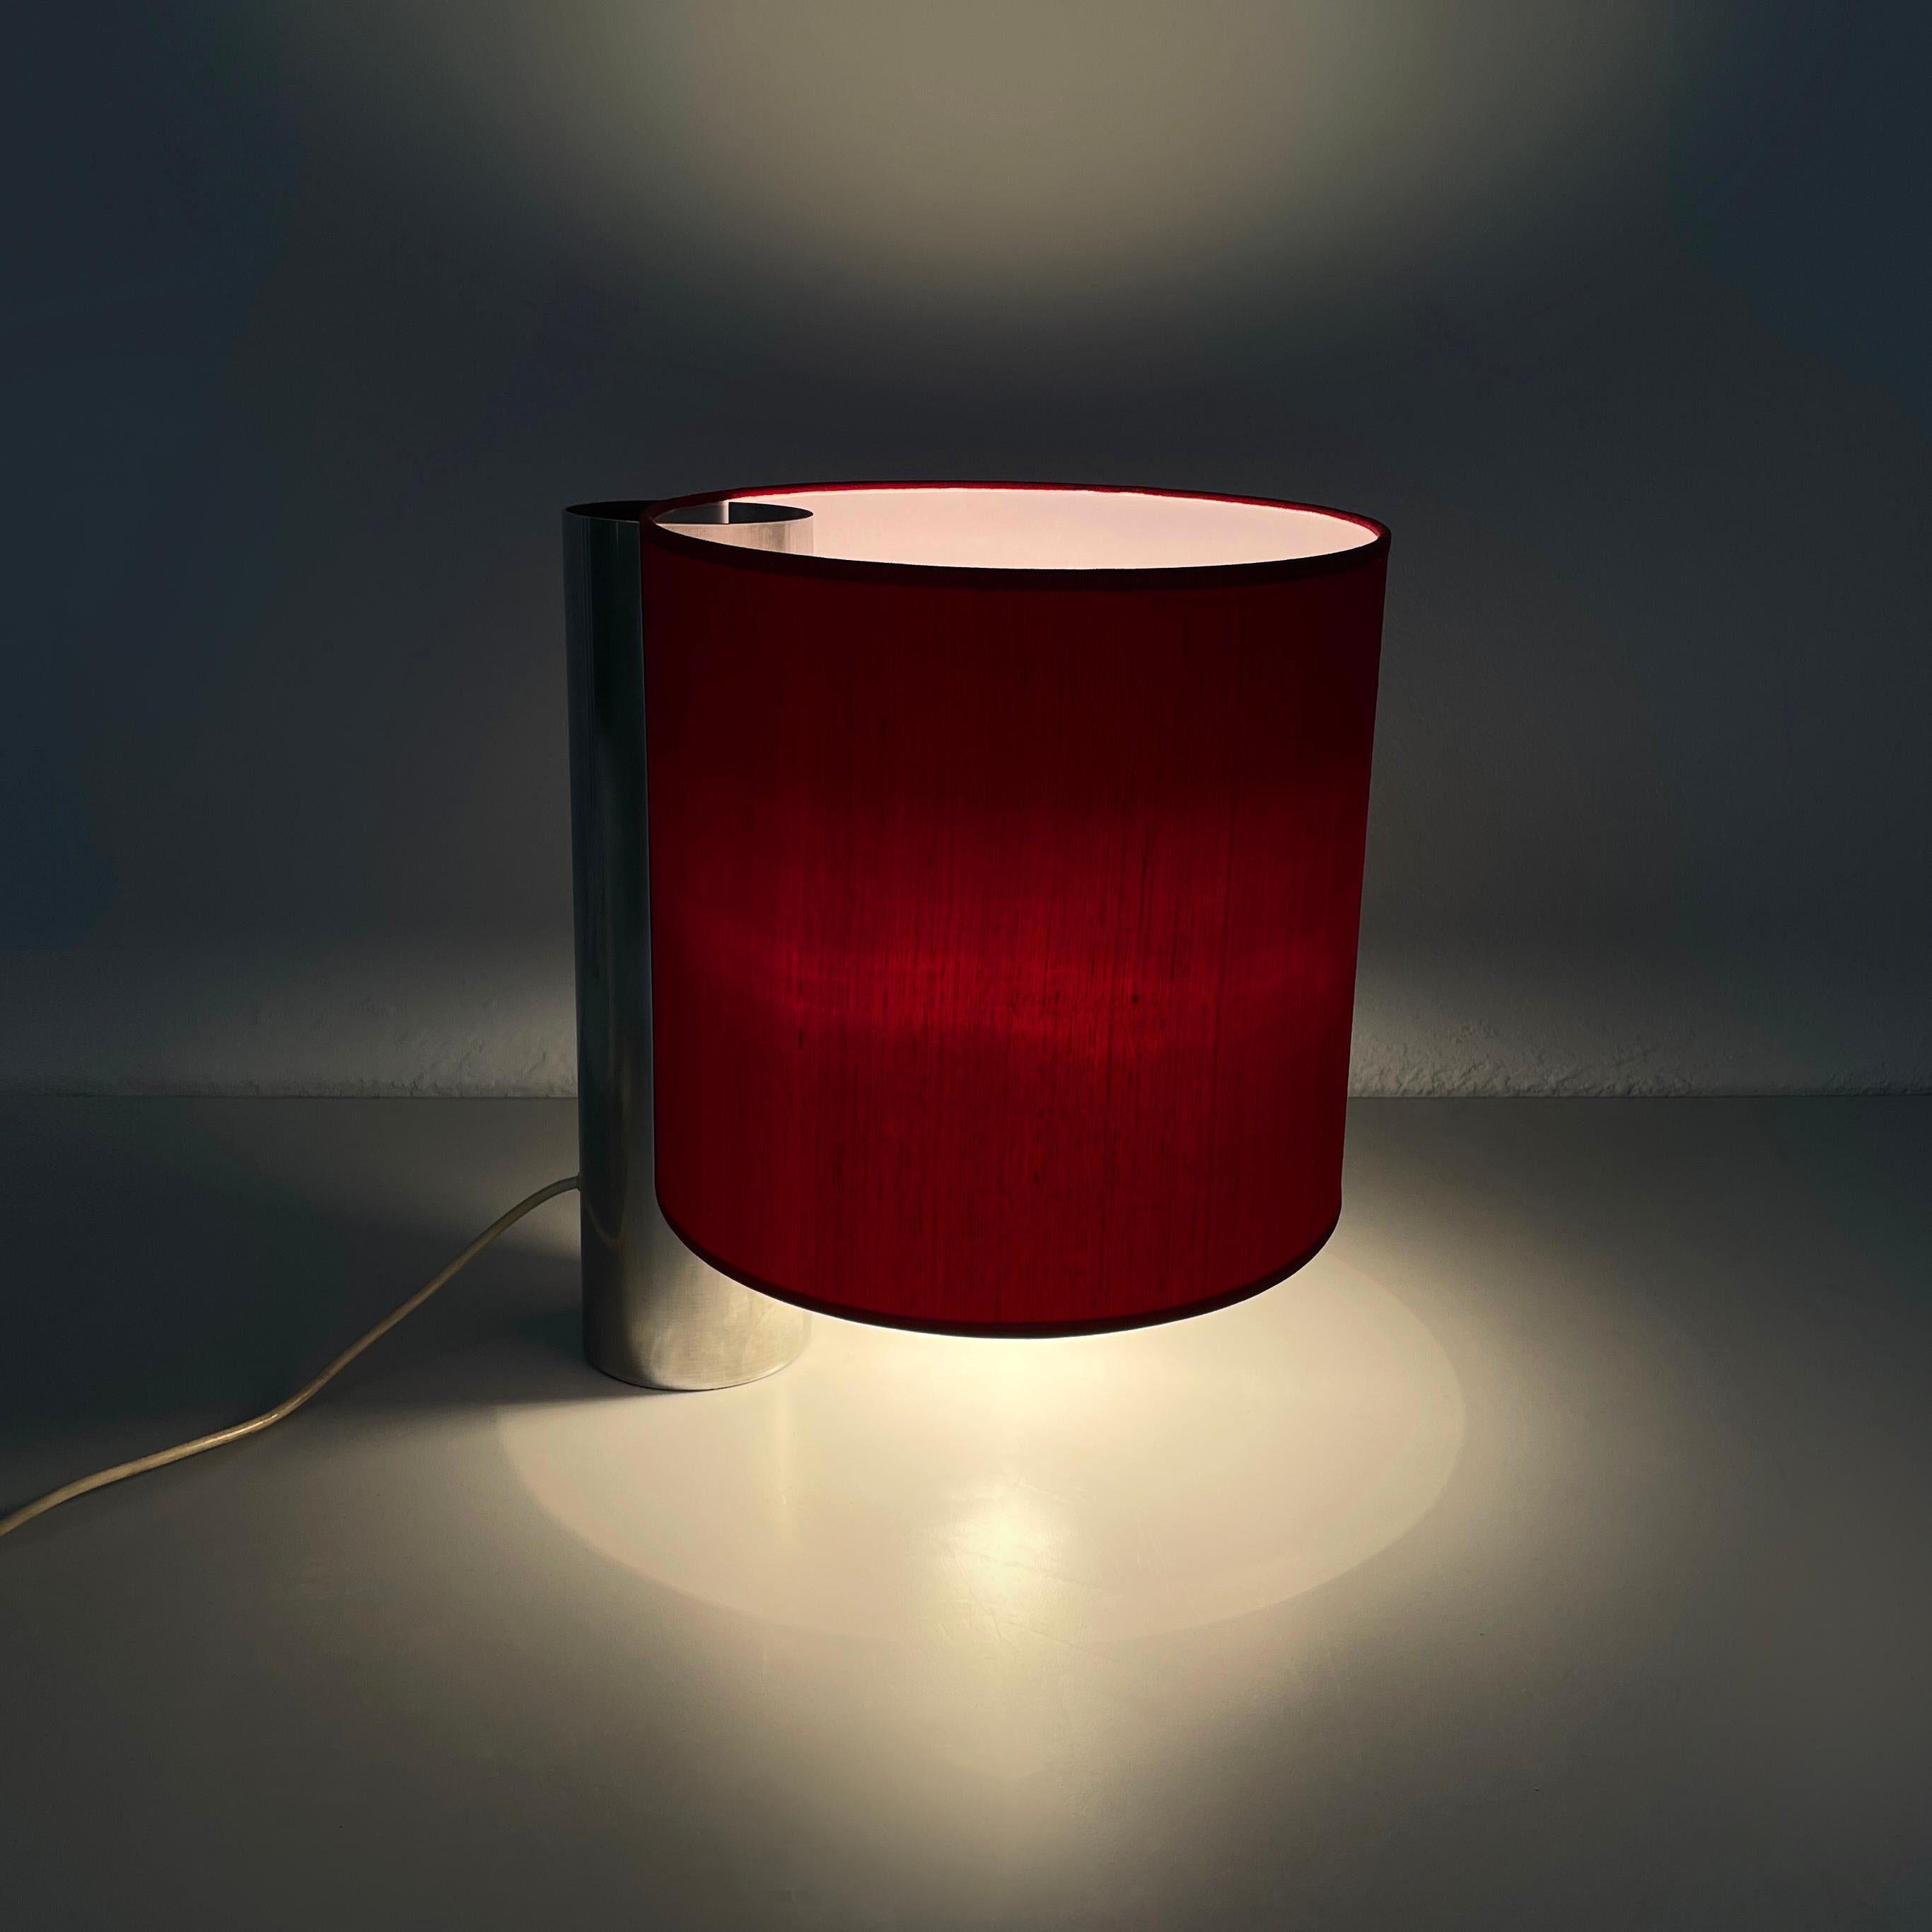 Italian modern Table lamp Fluette by Giuliana Gramigna for Quattrifolio, 1970s
Fantastic and vintage table lamp mod. Fluette with double bulb and cylindrical lampshade in red fabric with trimmings on the profiles. The cylindrical metal structure is